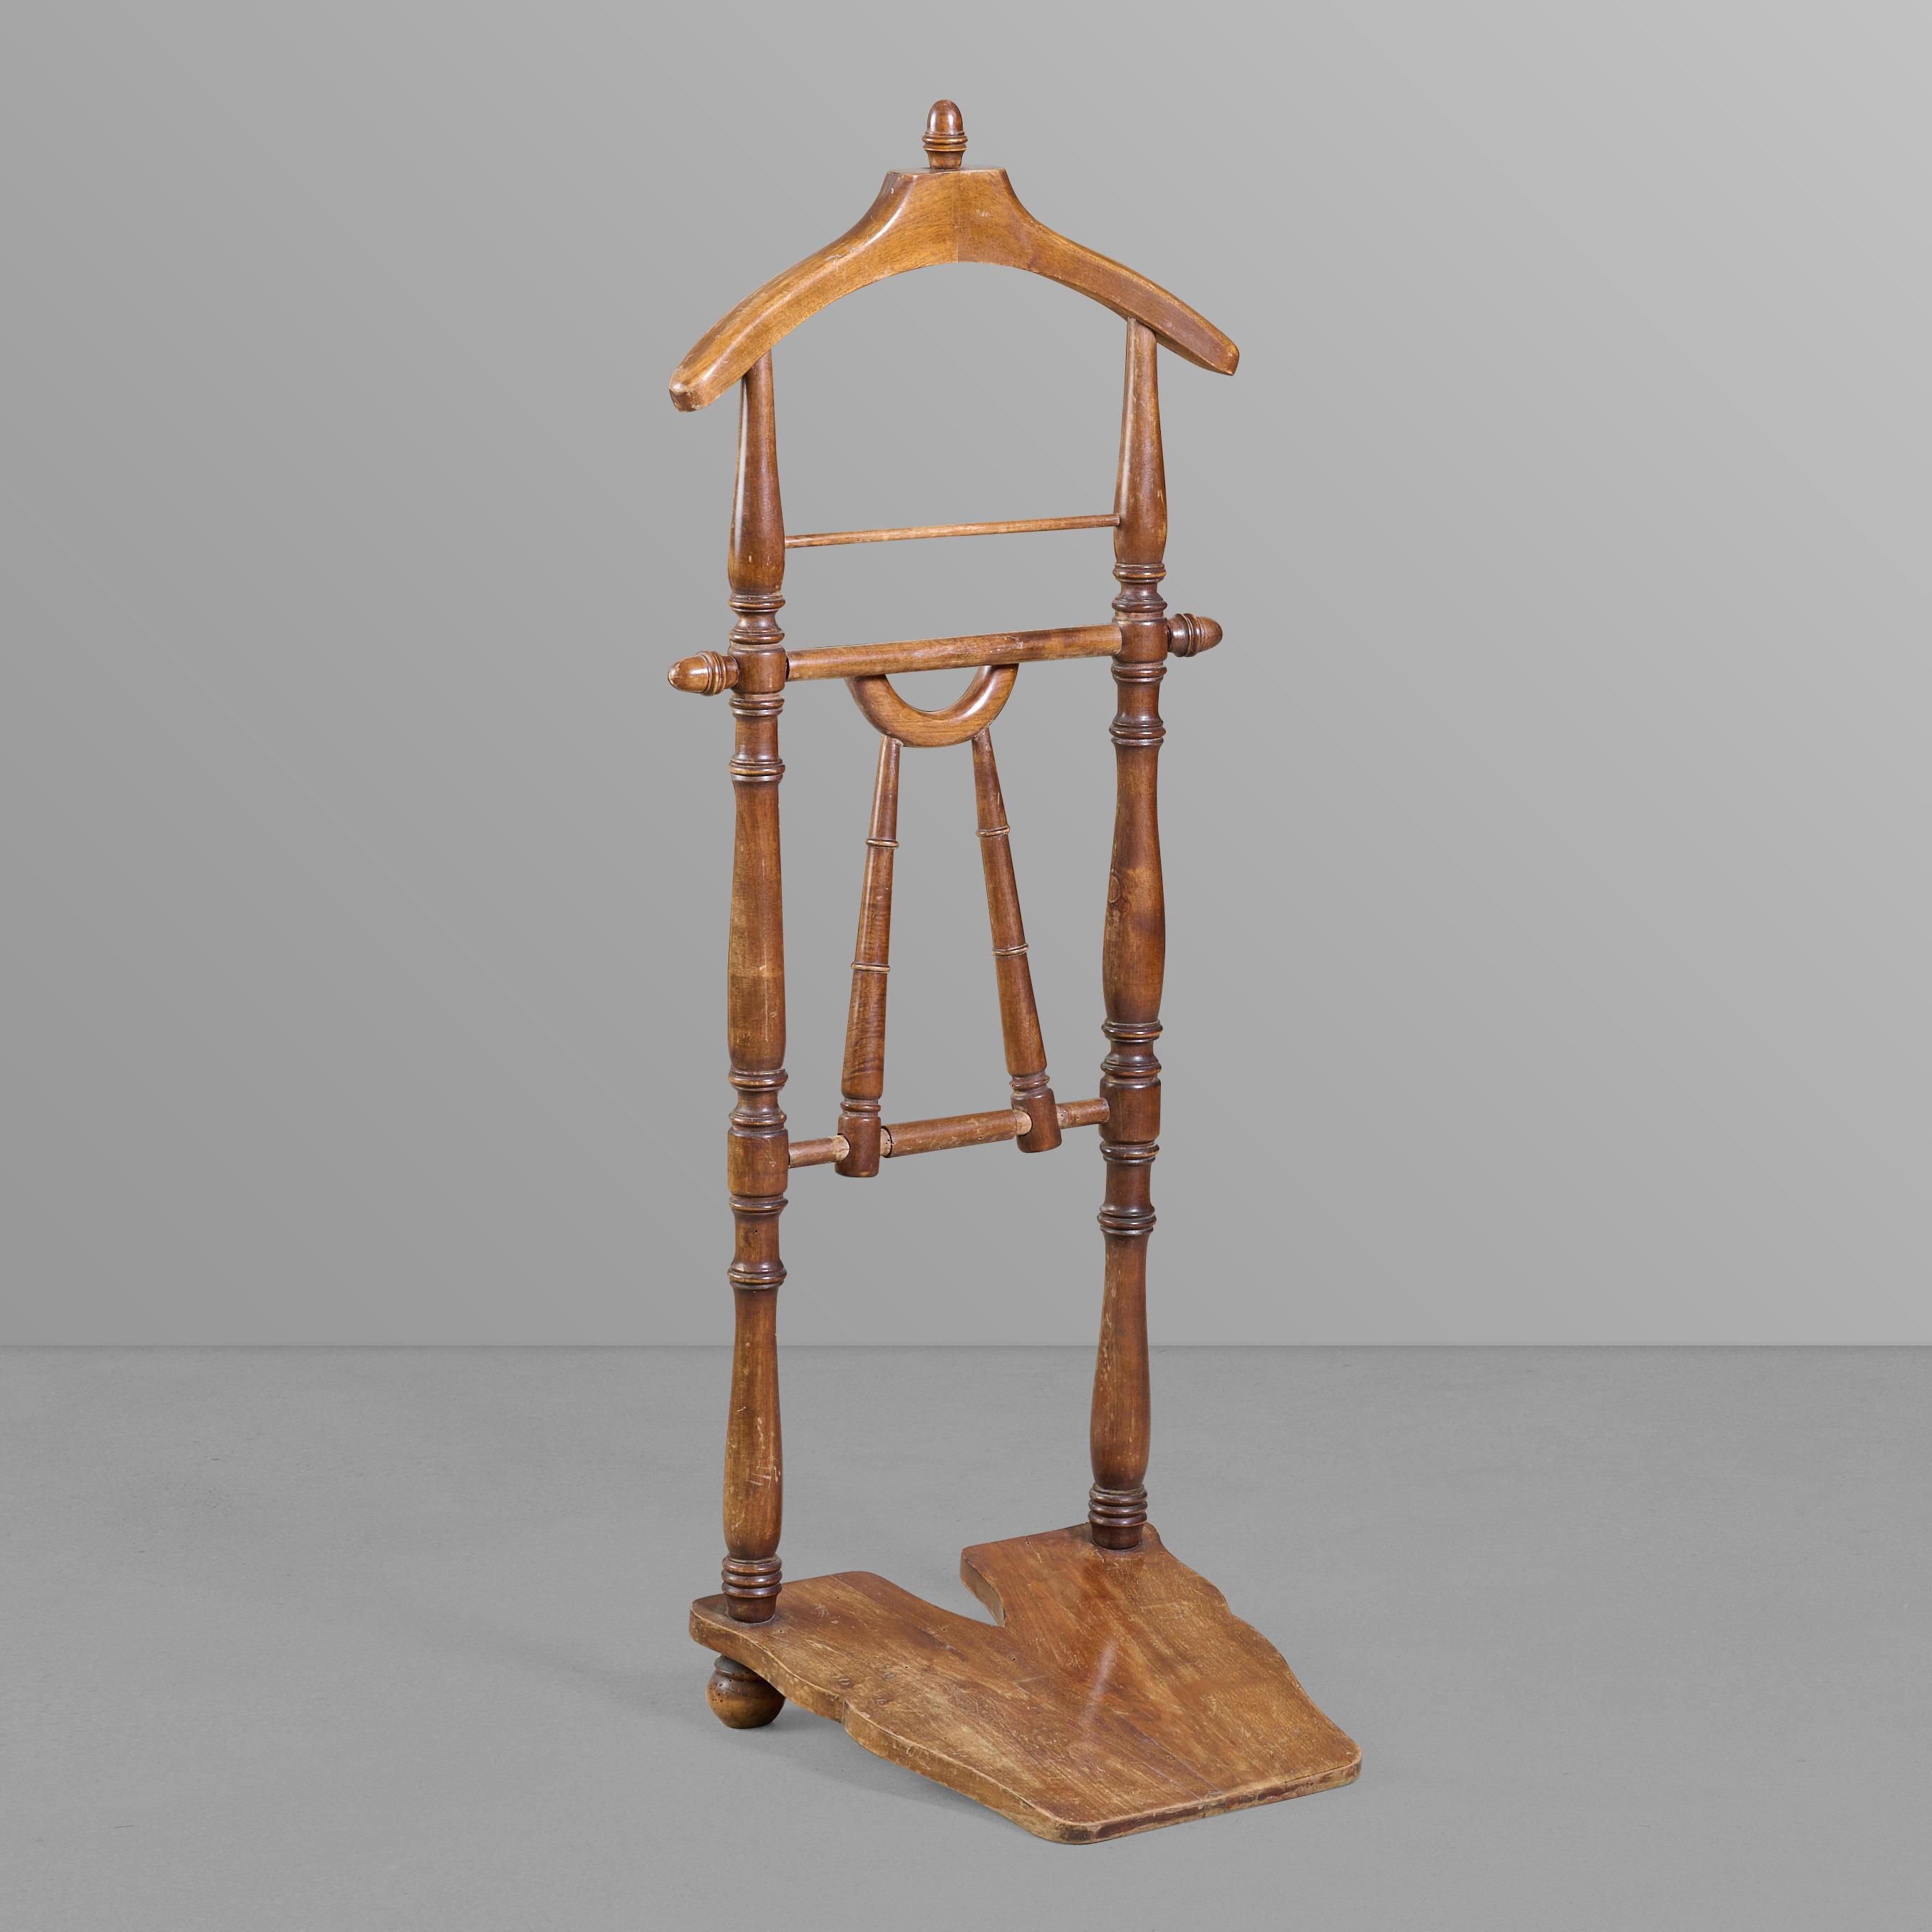 wooden valet stand